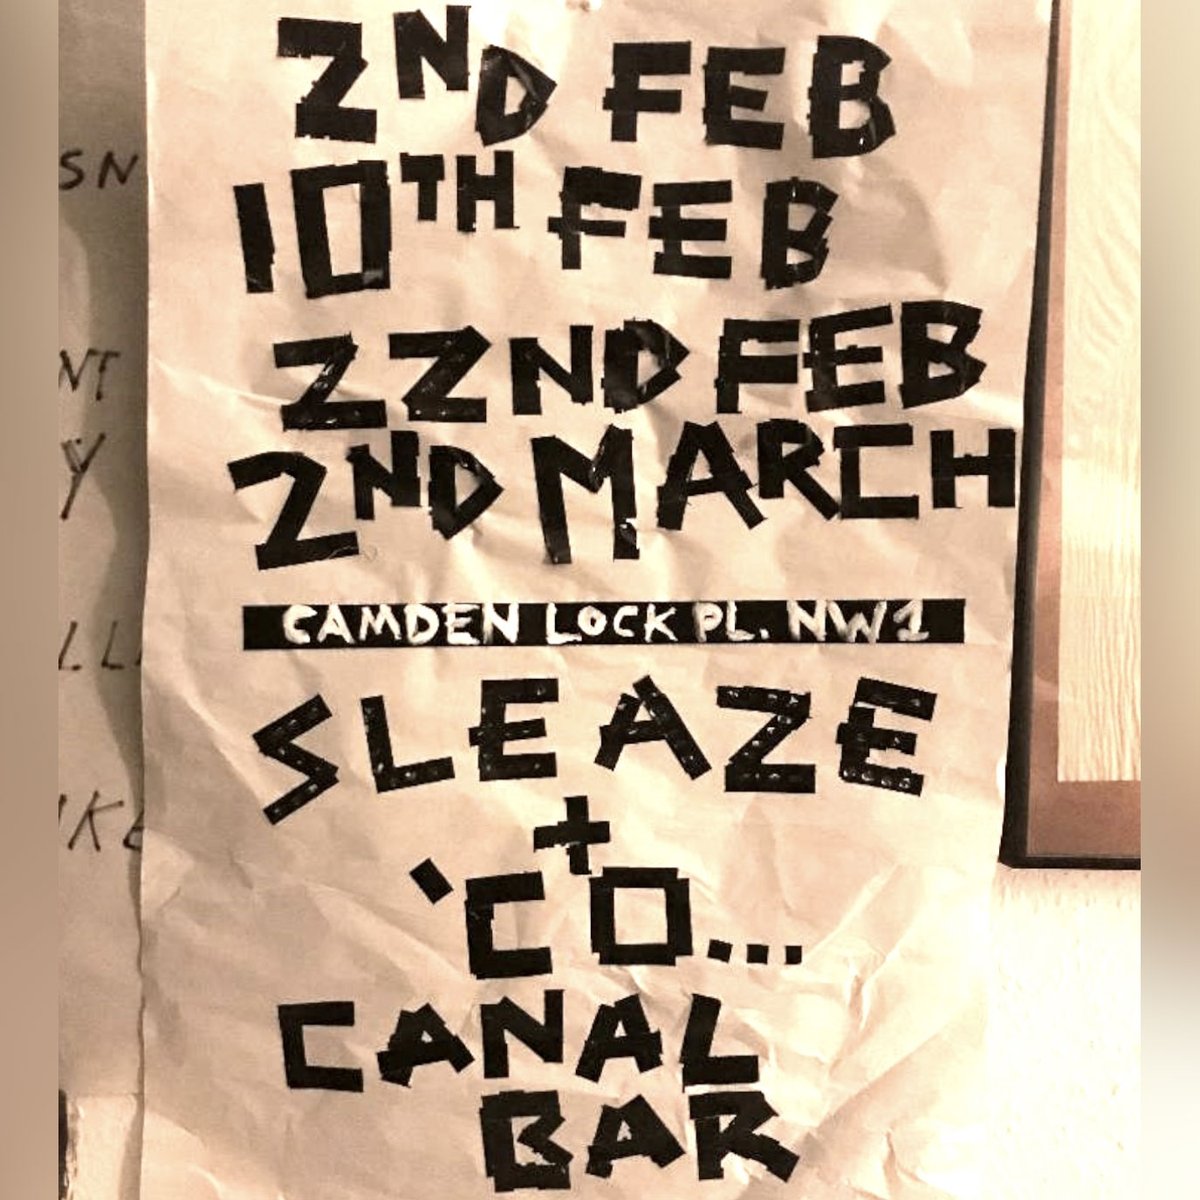 #HeadsUp #London💥#Indie outfit #SleazeBand start their 4-date residency at @dingwallslondon's #CanalBar in #Camden this #Friday 2nd Feb w/ support fm #CosmoPyke👋#DryJanuary's gone so grab a cold one & enjoy these #SouthLondon legends 🎵 Tix via link👇😎

bit.ly/3ufoq0G